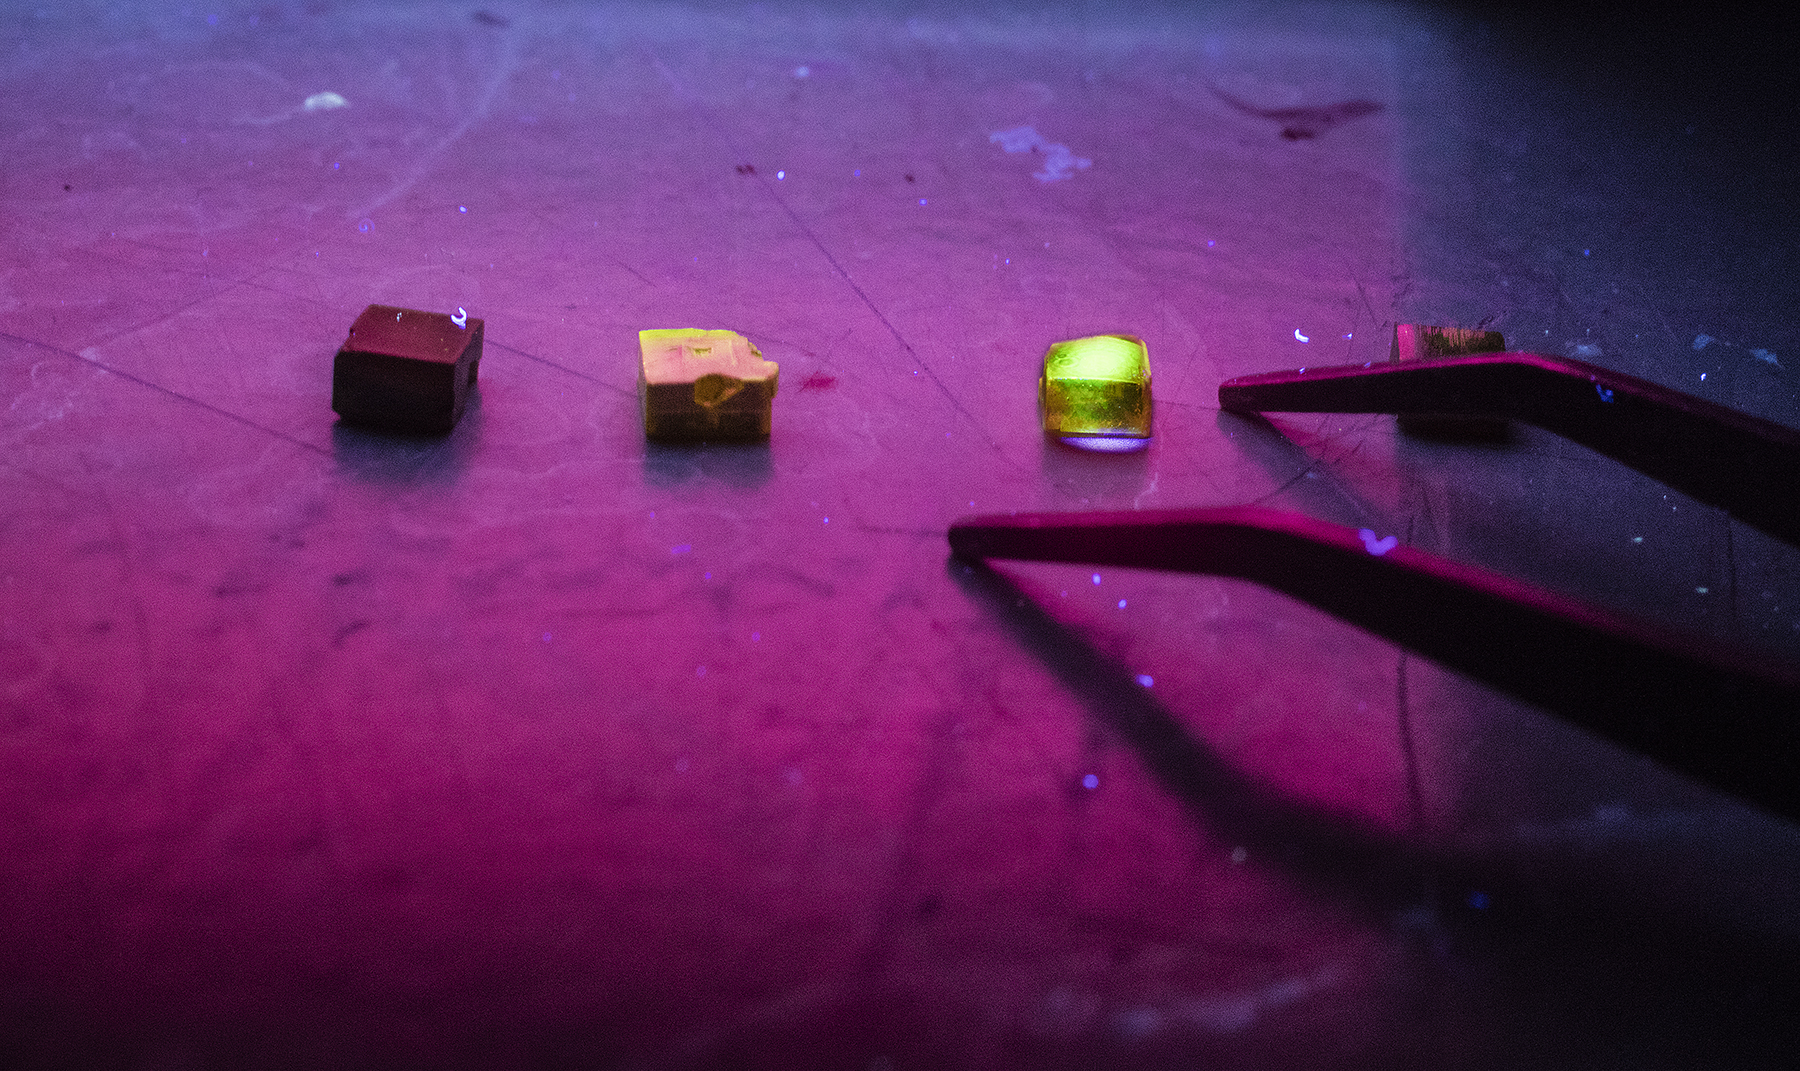 Three crystals of methylammonium lead tribromide are illuminated by ultraviolet light. High-quality crystals suitable for X-ray detection glow green when struck by an ultraviolet laser, as illustrated by the crystal at far right.